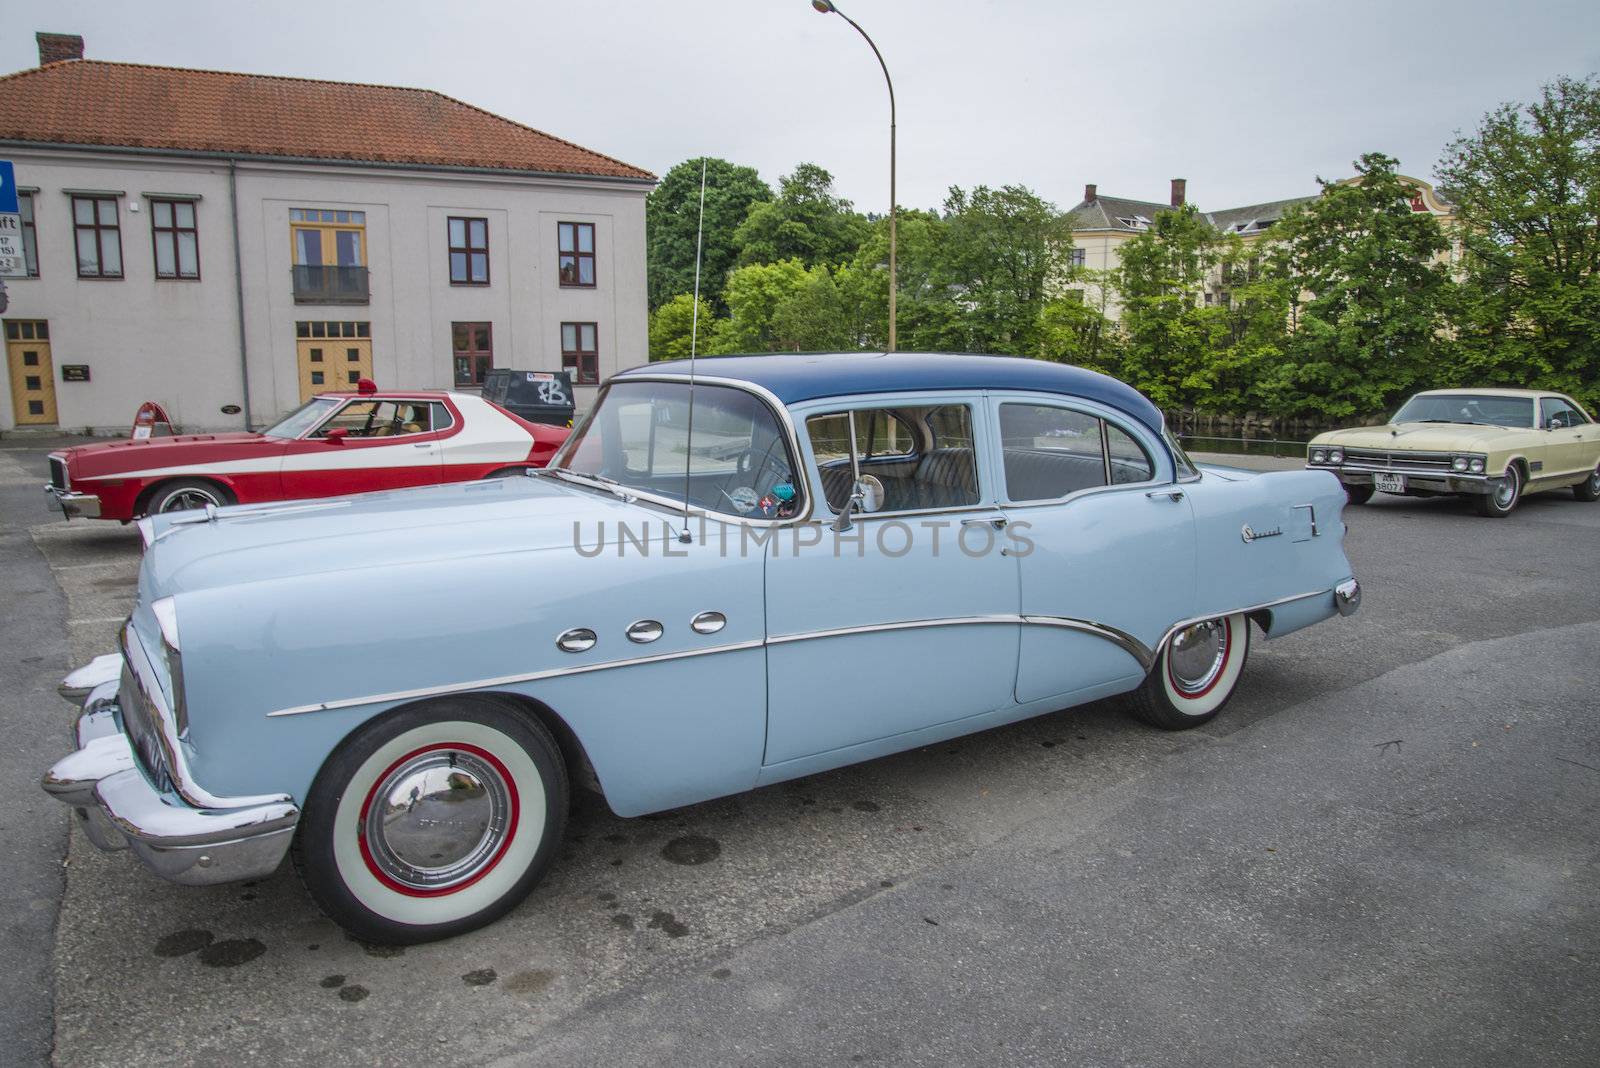 amcar, buick special 1954 by steirus